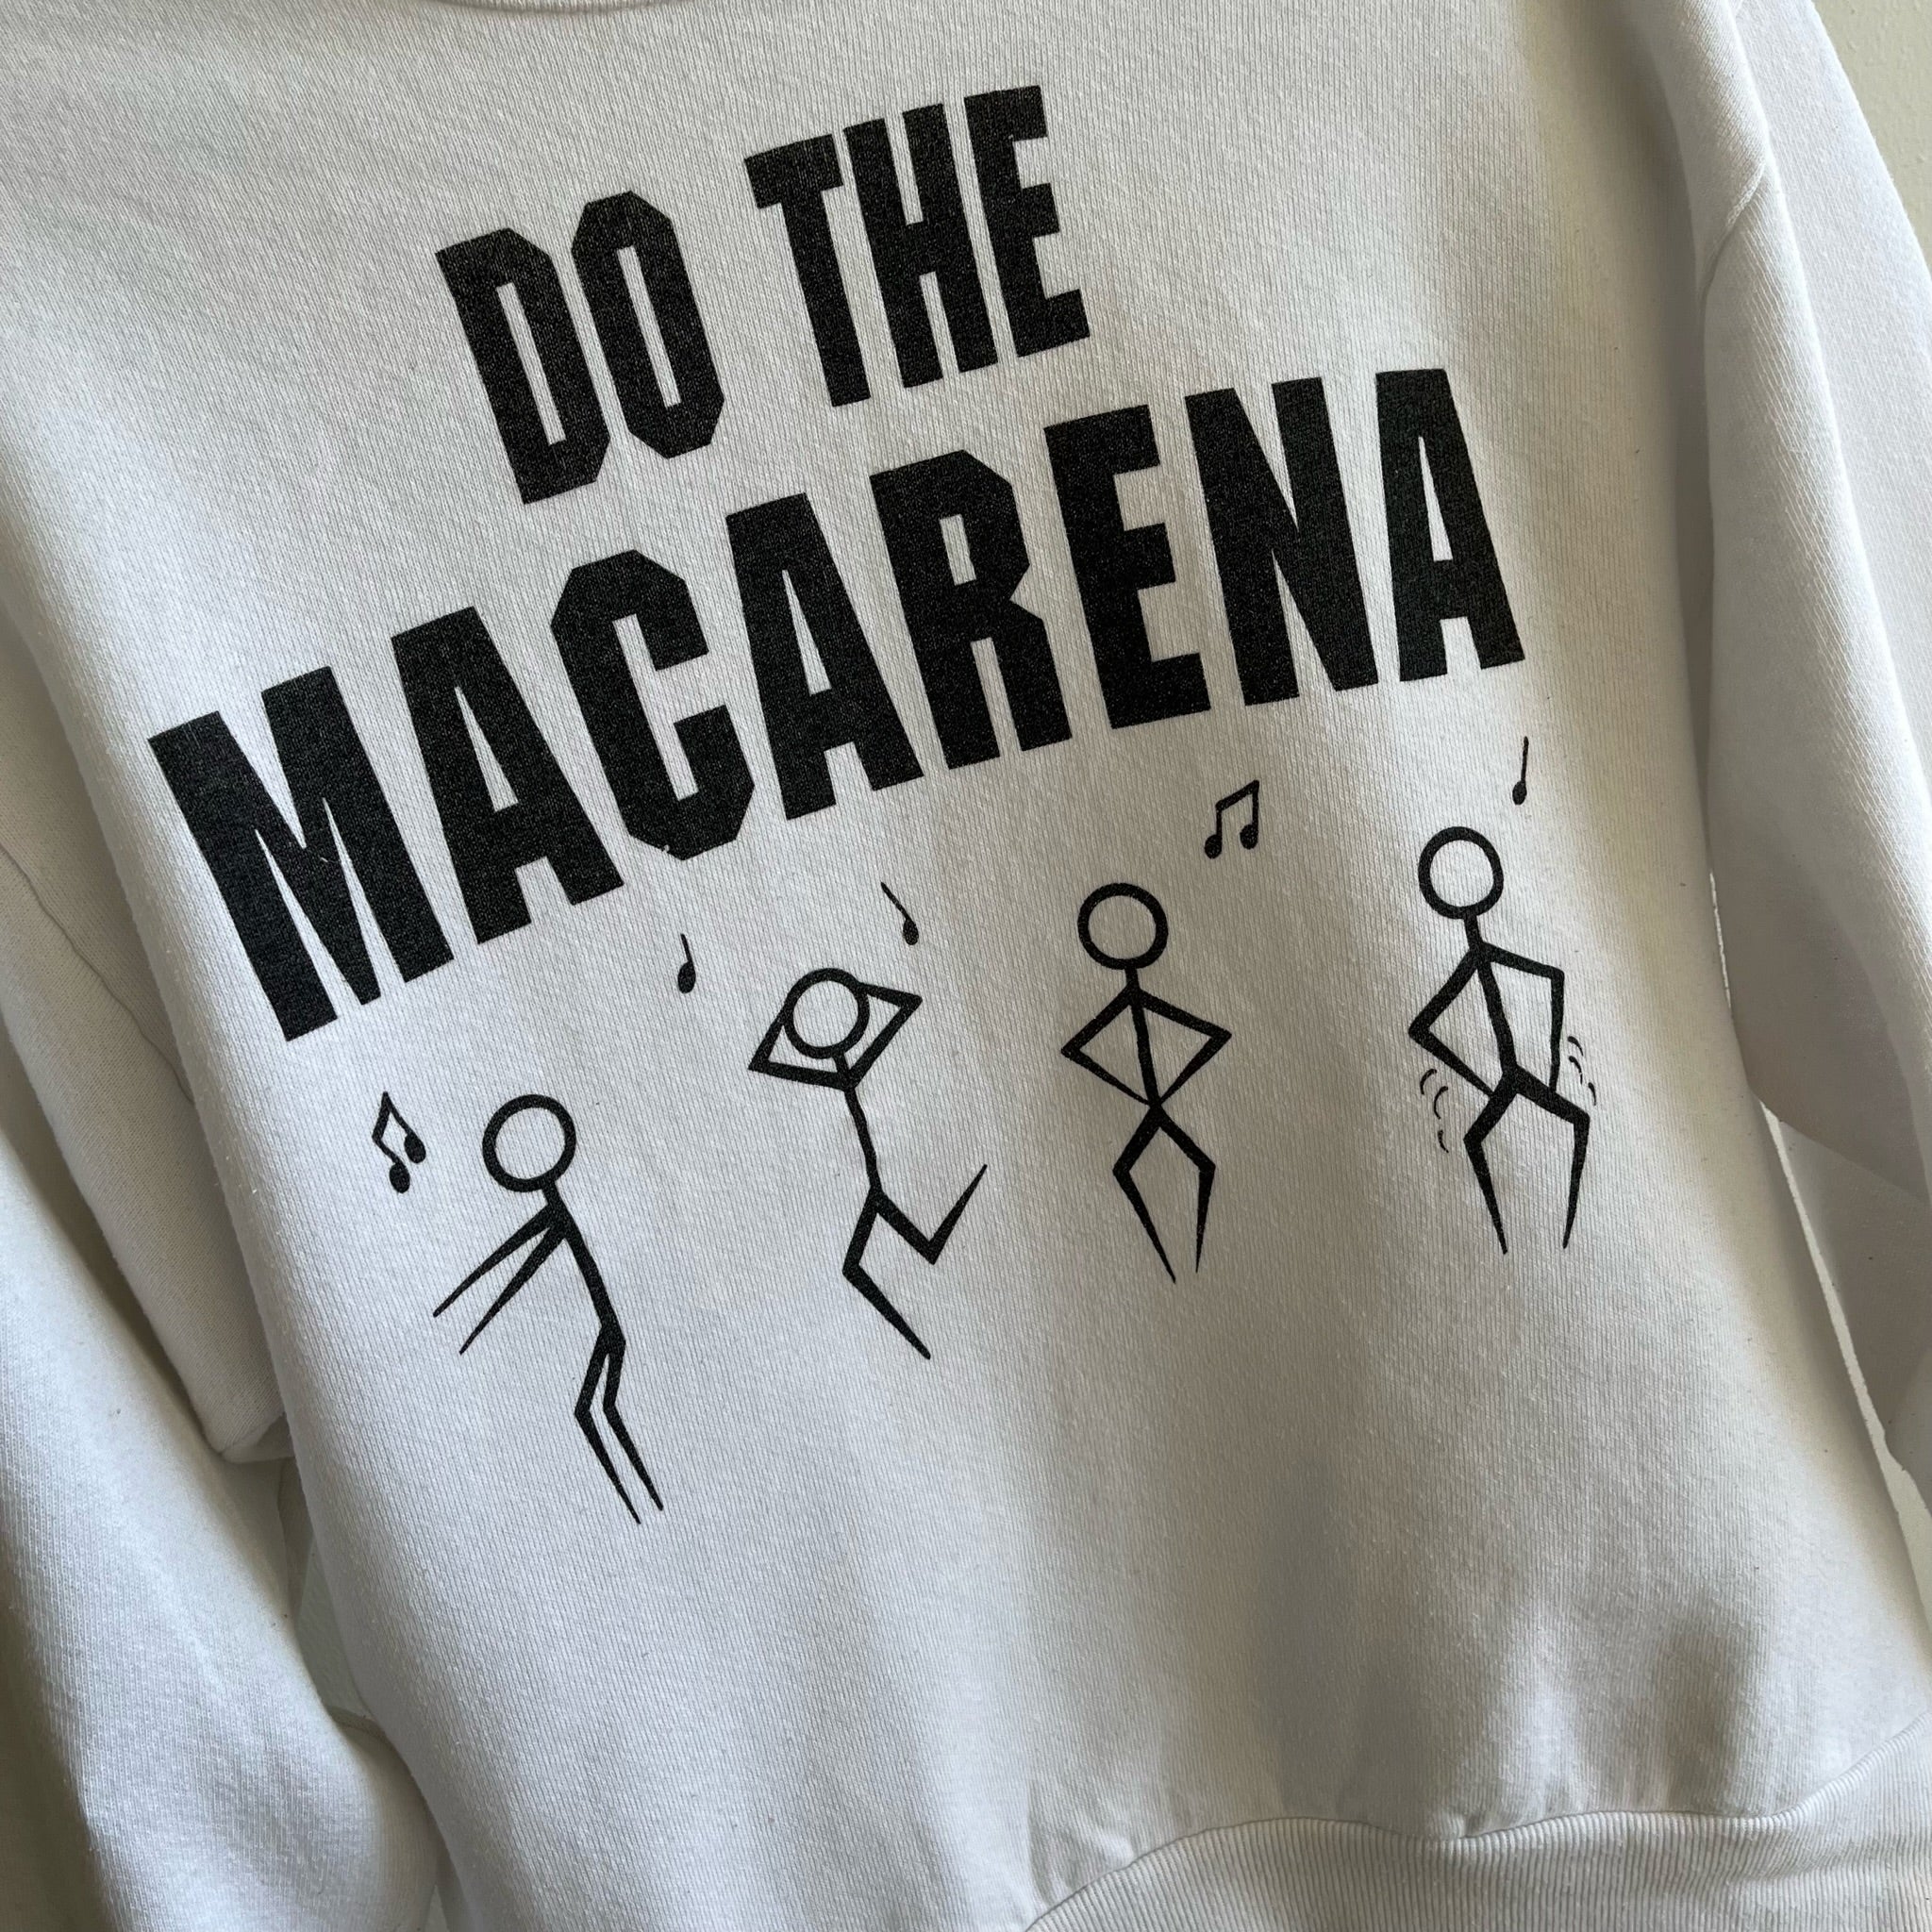 1990s Do the Macarena Sweatshirt (the tag is a must see)